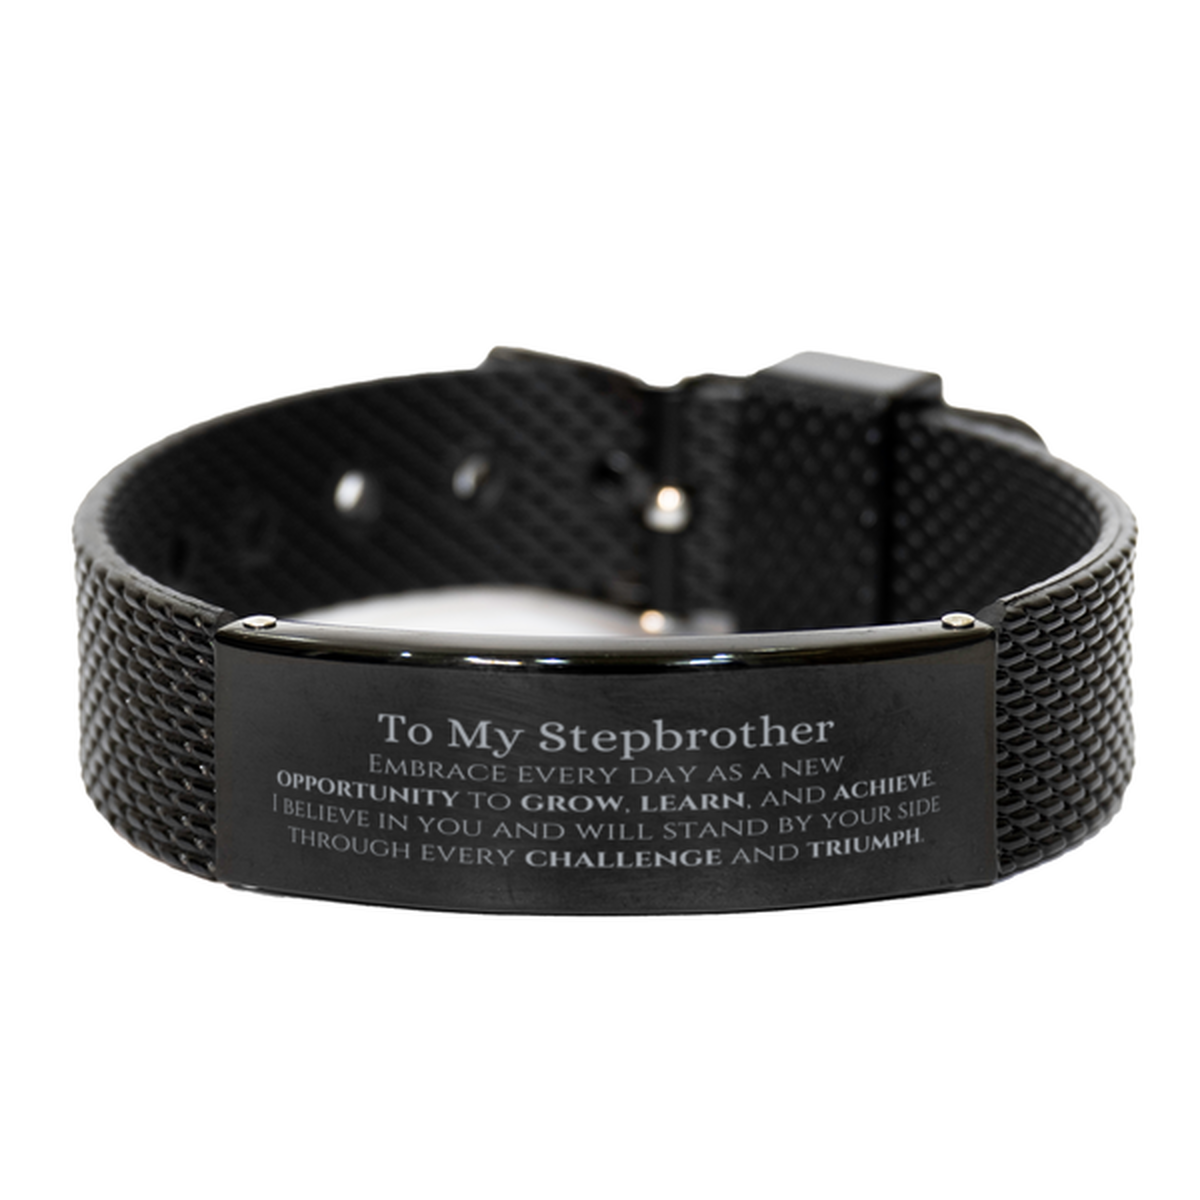 To My Stepbrother Gifts, I believe in you and will stand by your side, Inspirational Black Shark Mesh Bracelet For Stepbrother, Birthday Christmas Motivational Stepbrother Gifts